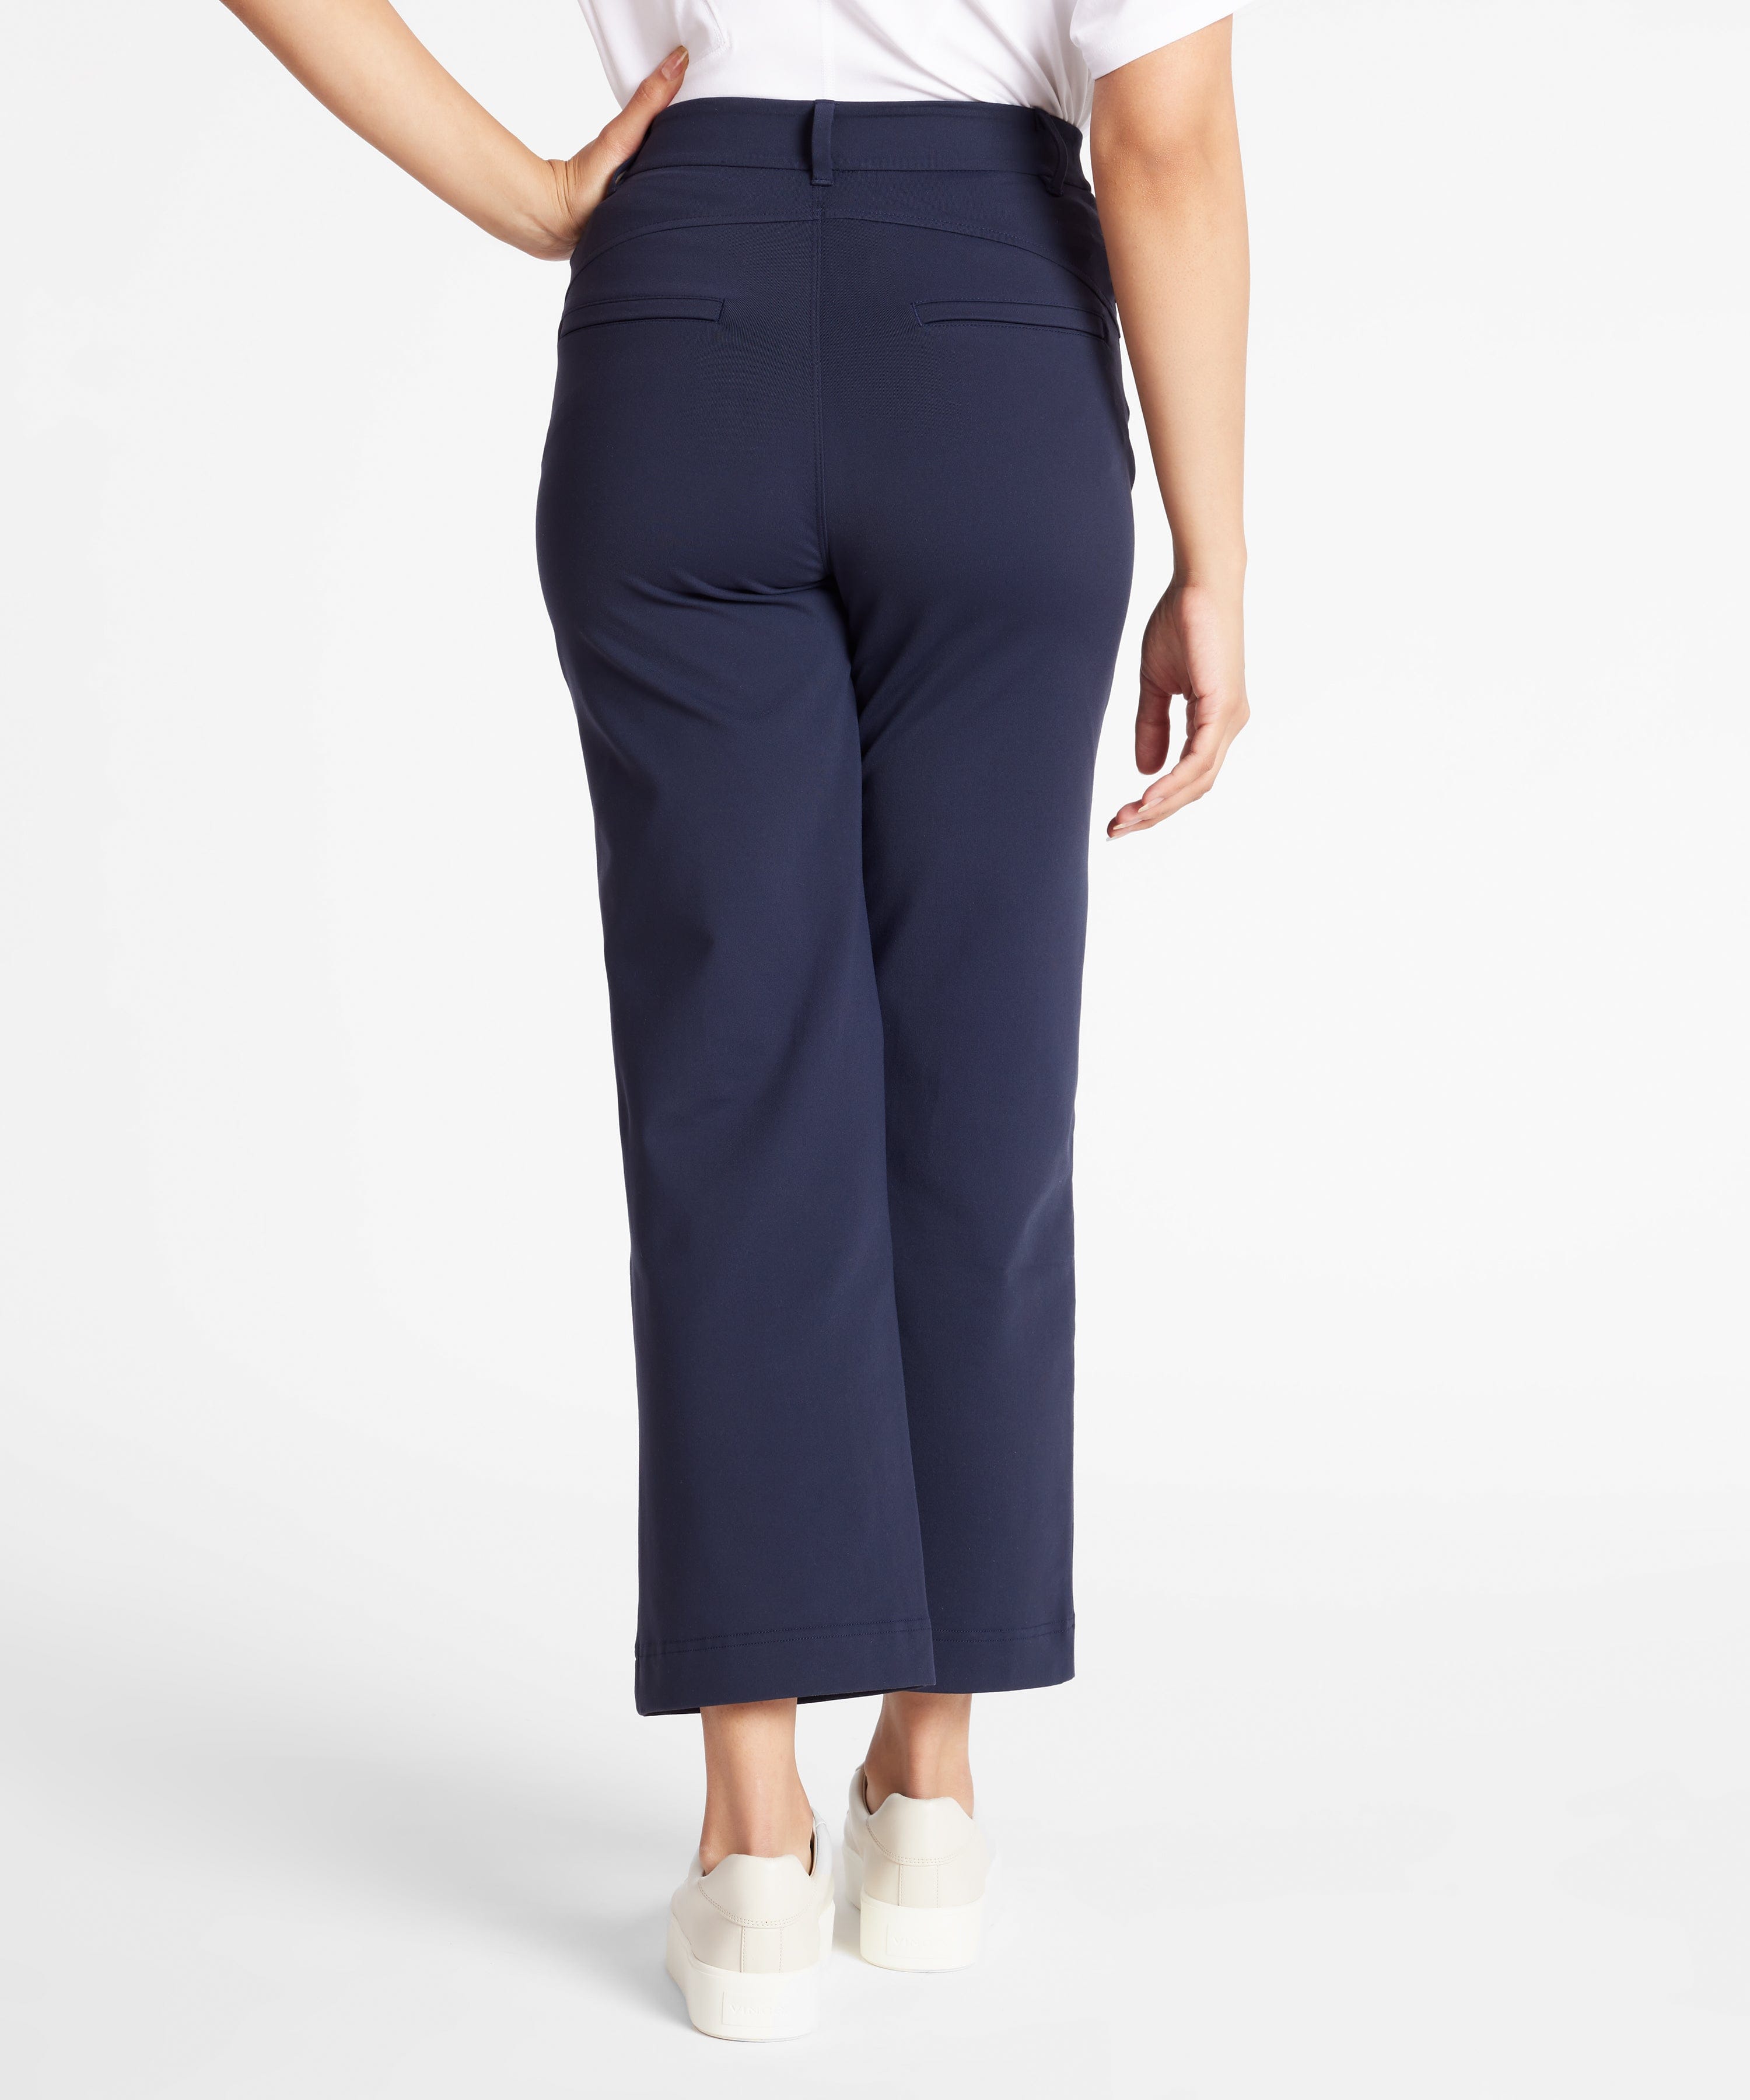 Women's All Day Pant by LAIRD